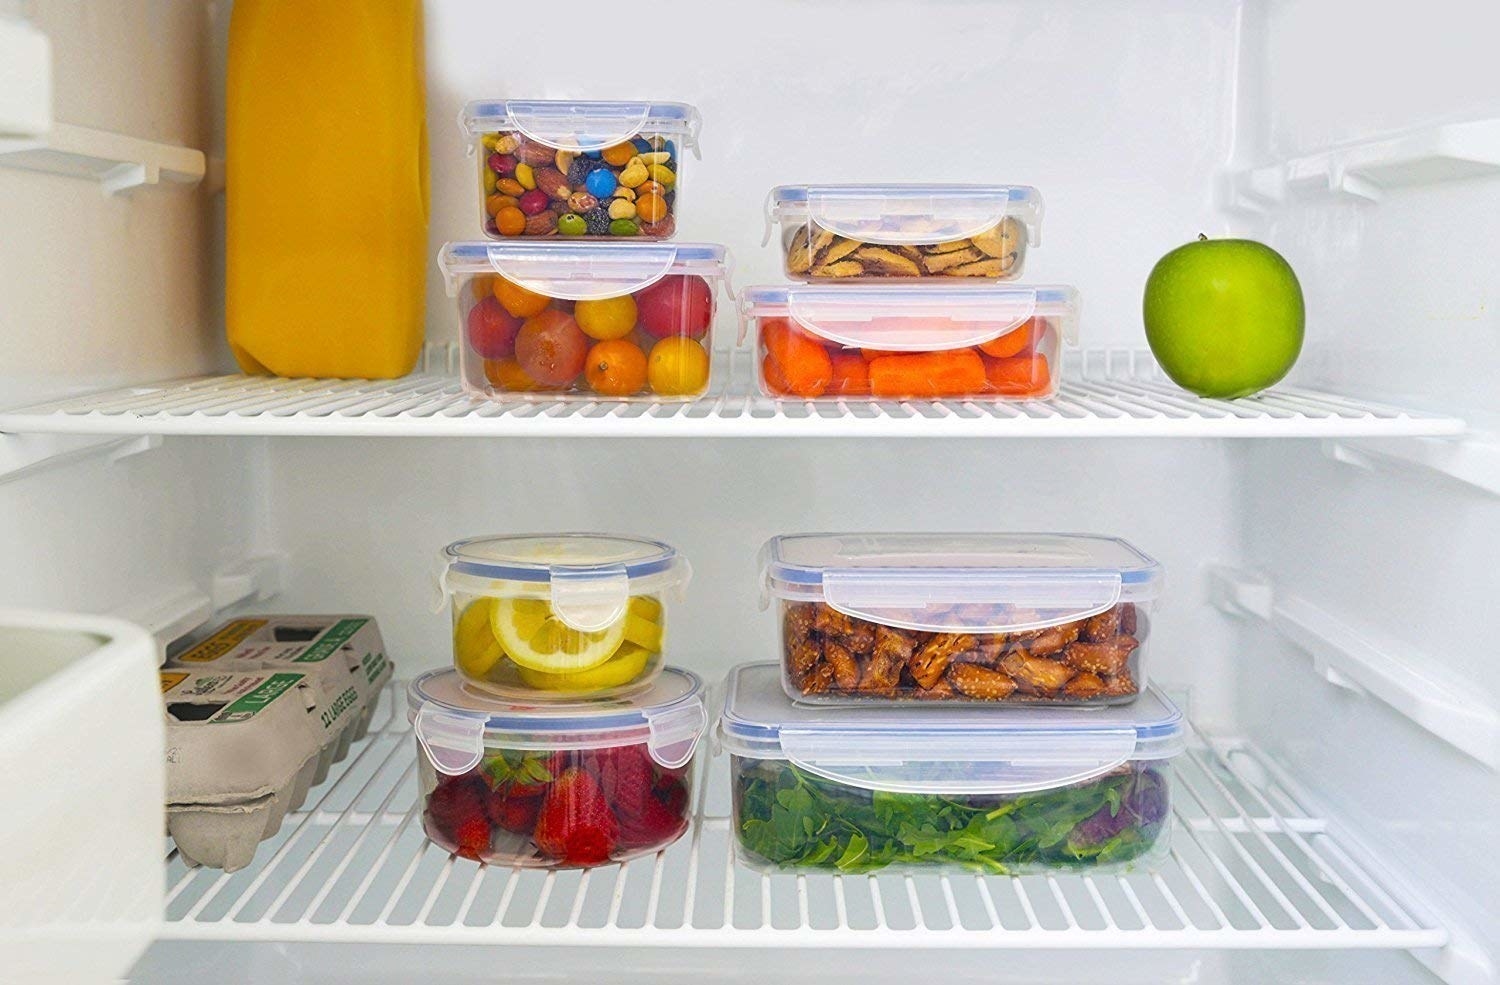 6 airtight containers in fridge containing fruits, vegetables, dry fruits and candy